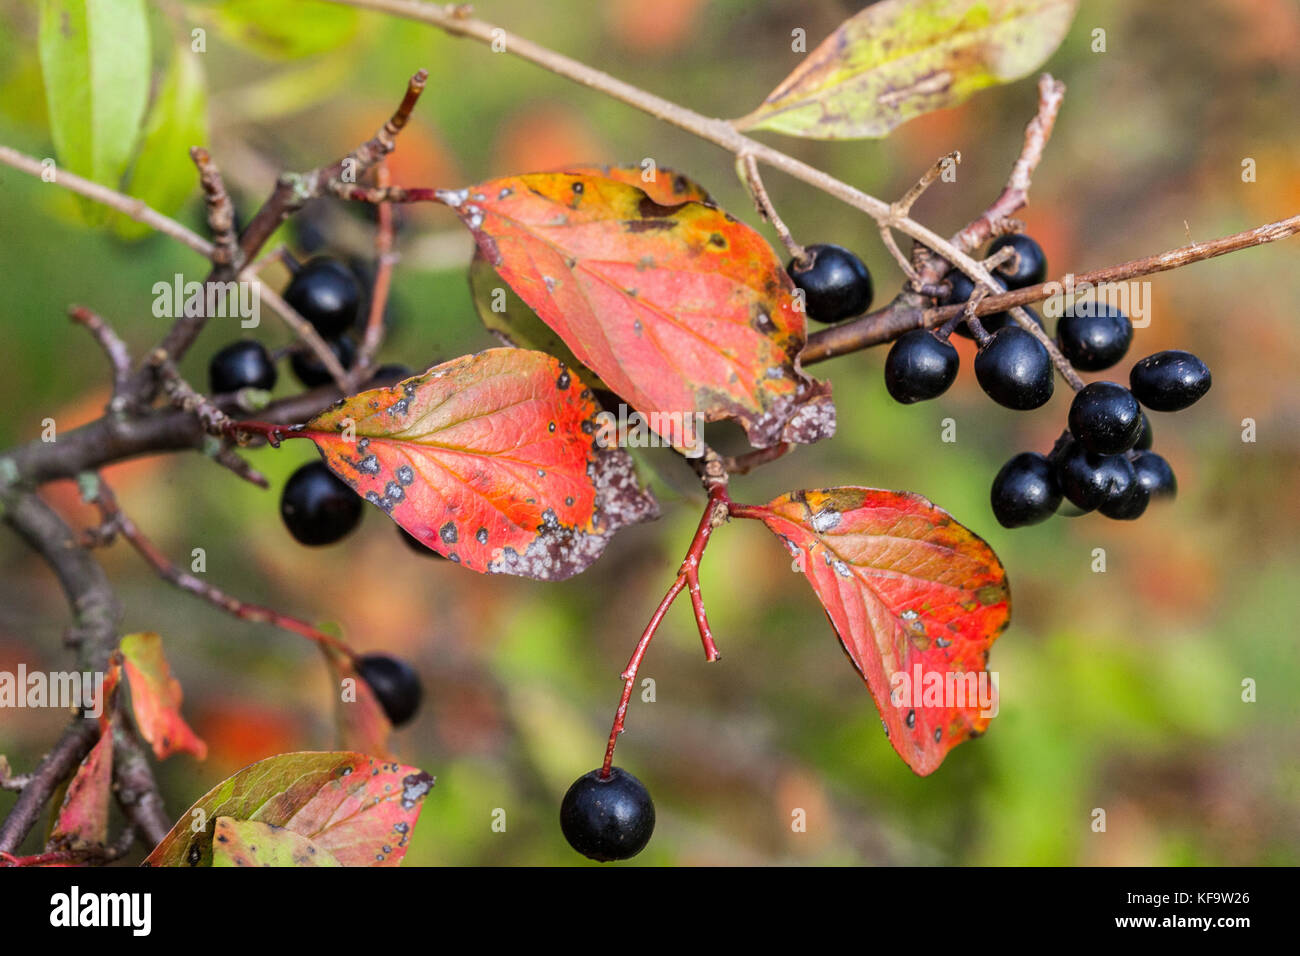 Cotoneaster pseudoambiguus black berries, fruits on branch, shrub in autumn Cotoneaster berries Stock Photo